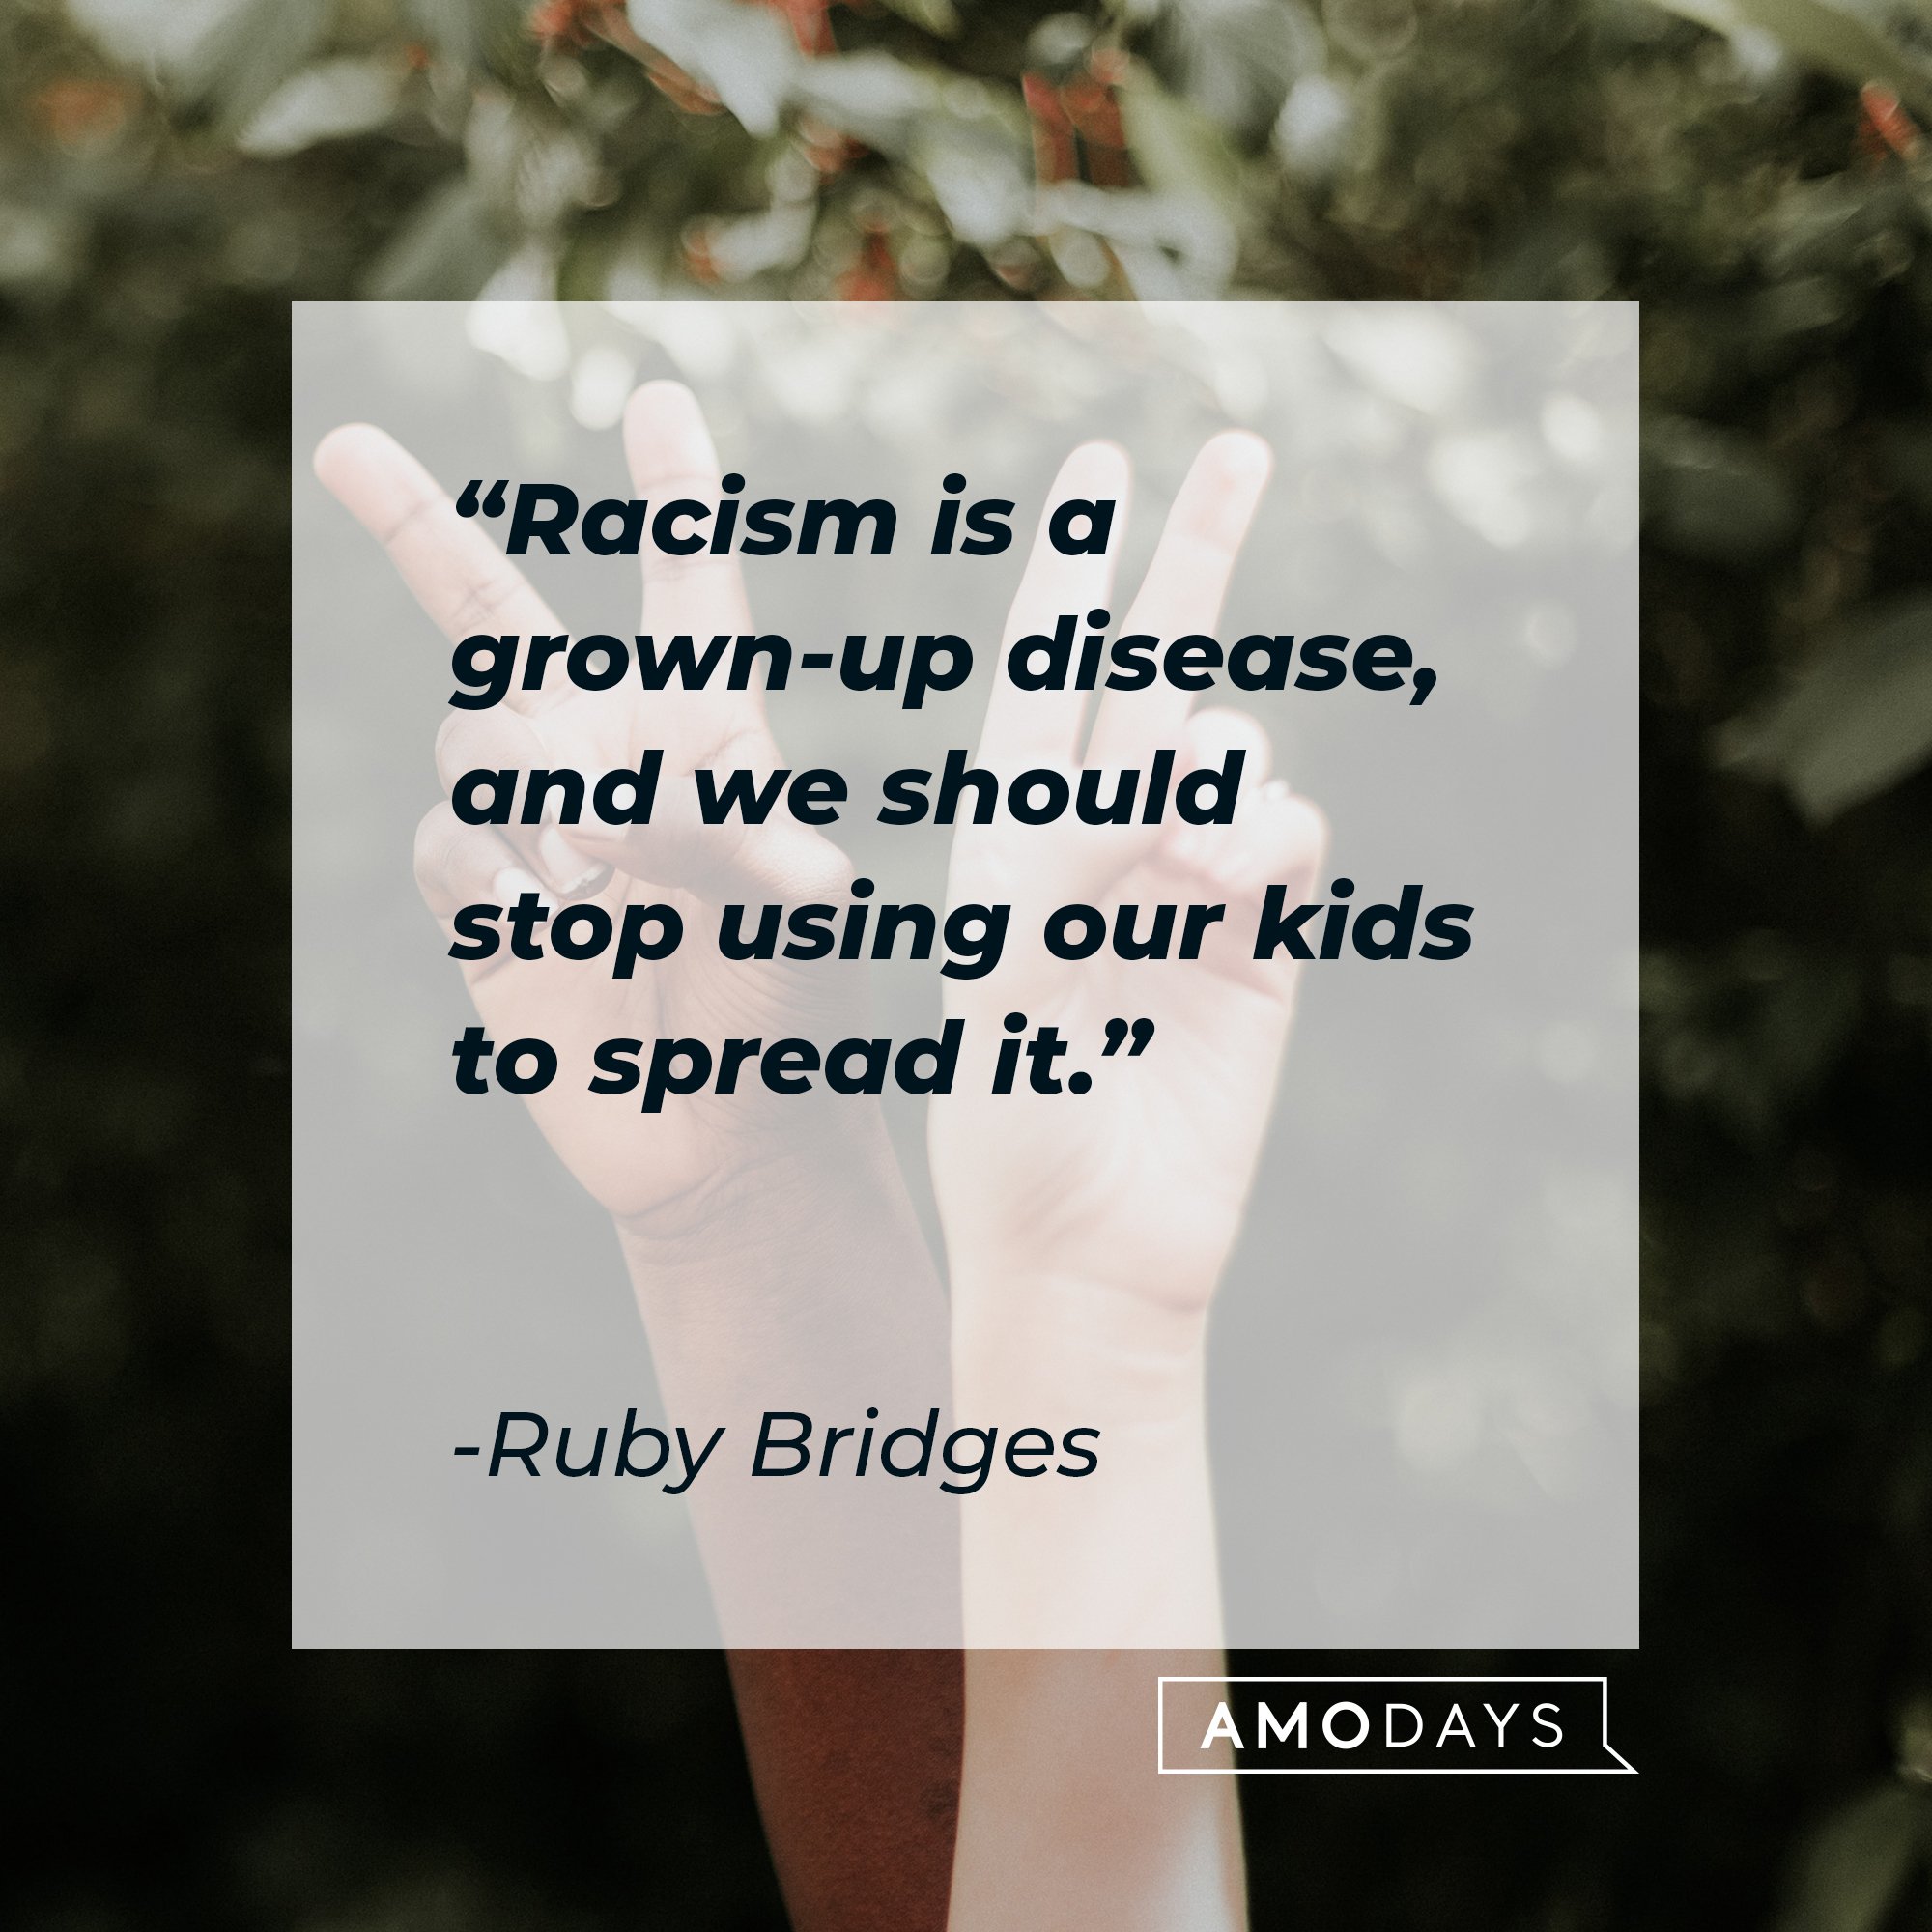 Ruby Bridges’ quote: “Racism is a grown-up disease, and we should stop using our kids to spread it.” | Image: AmoDays 